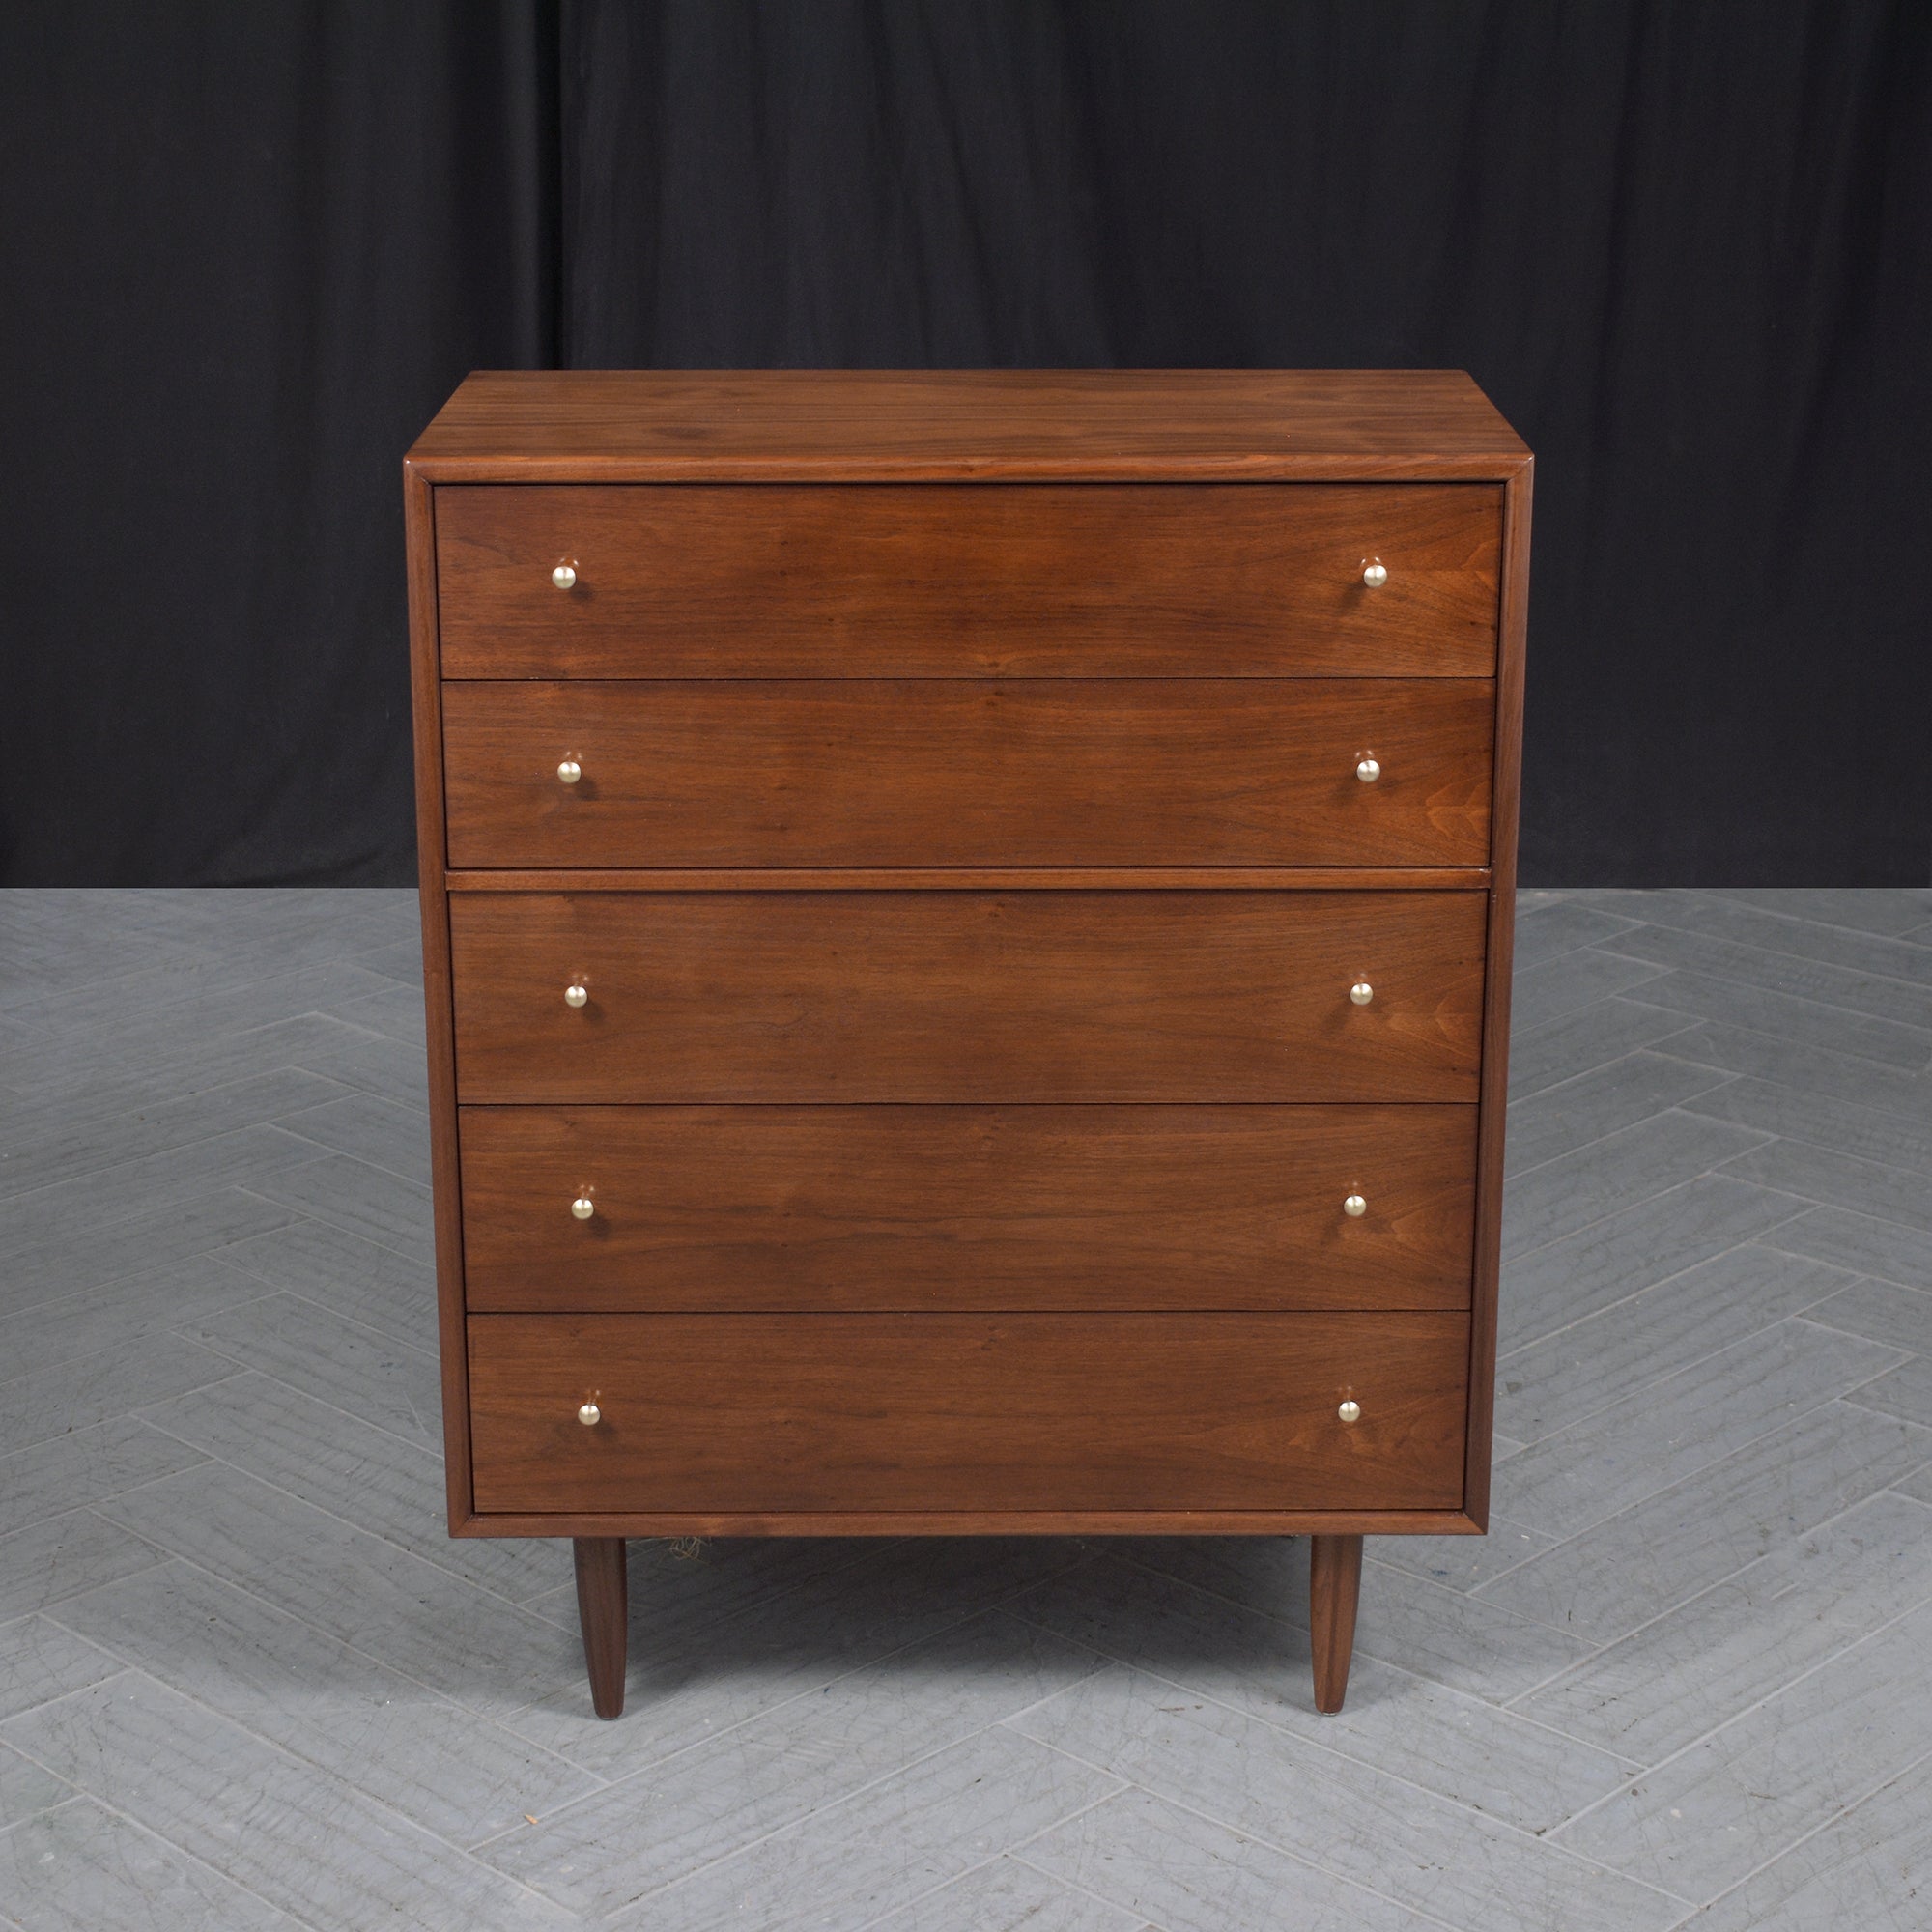 Danish Modern Mahogany Dresser: 1960s Craftsmanship Redefined In Good Condition For Sale In Los Angeles, CA